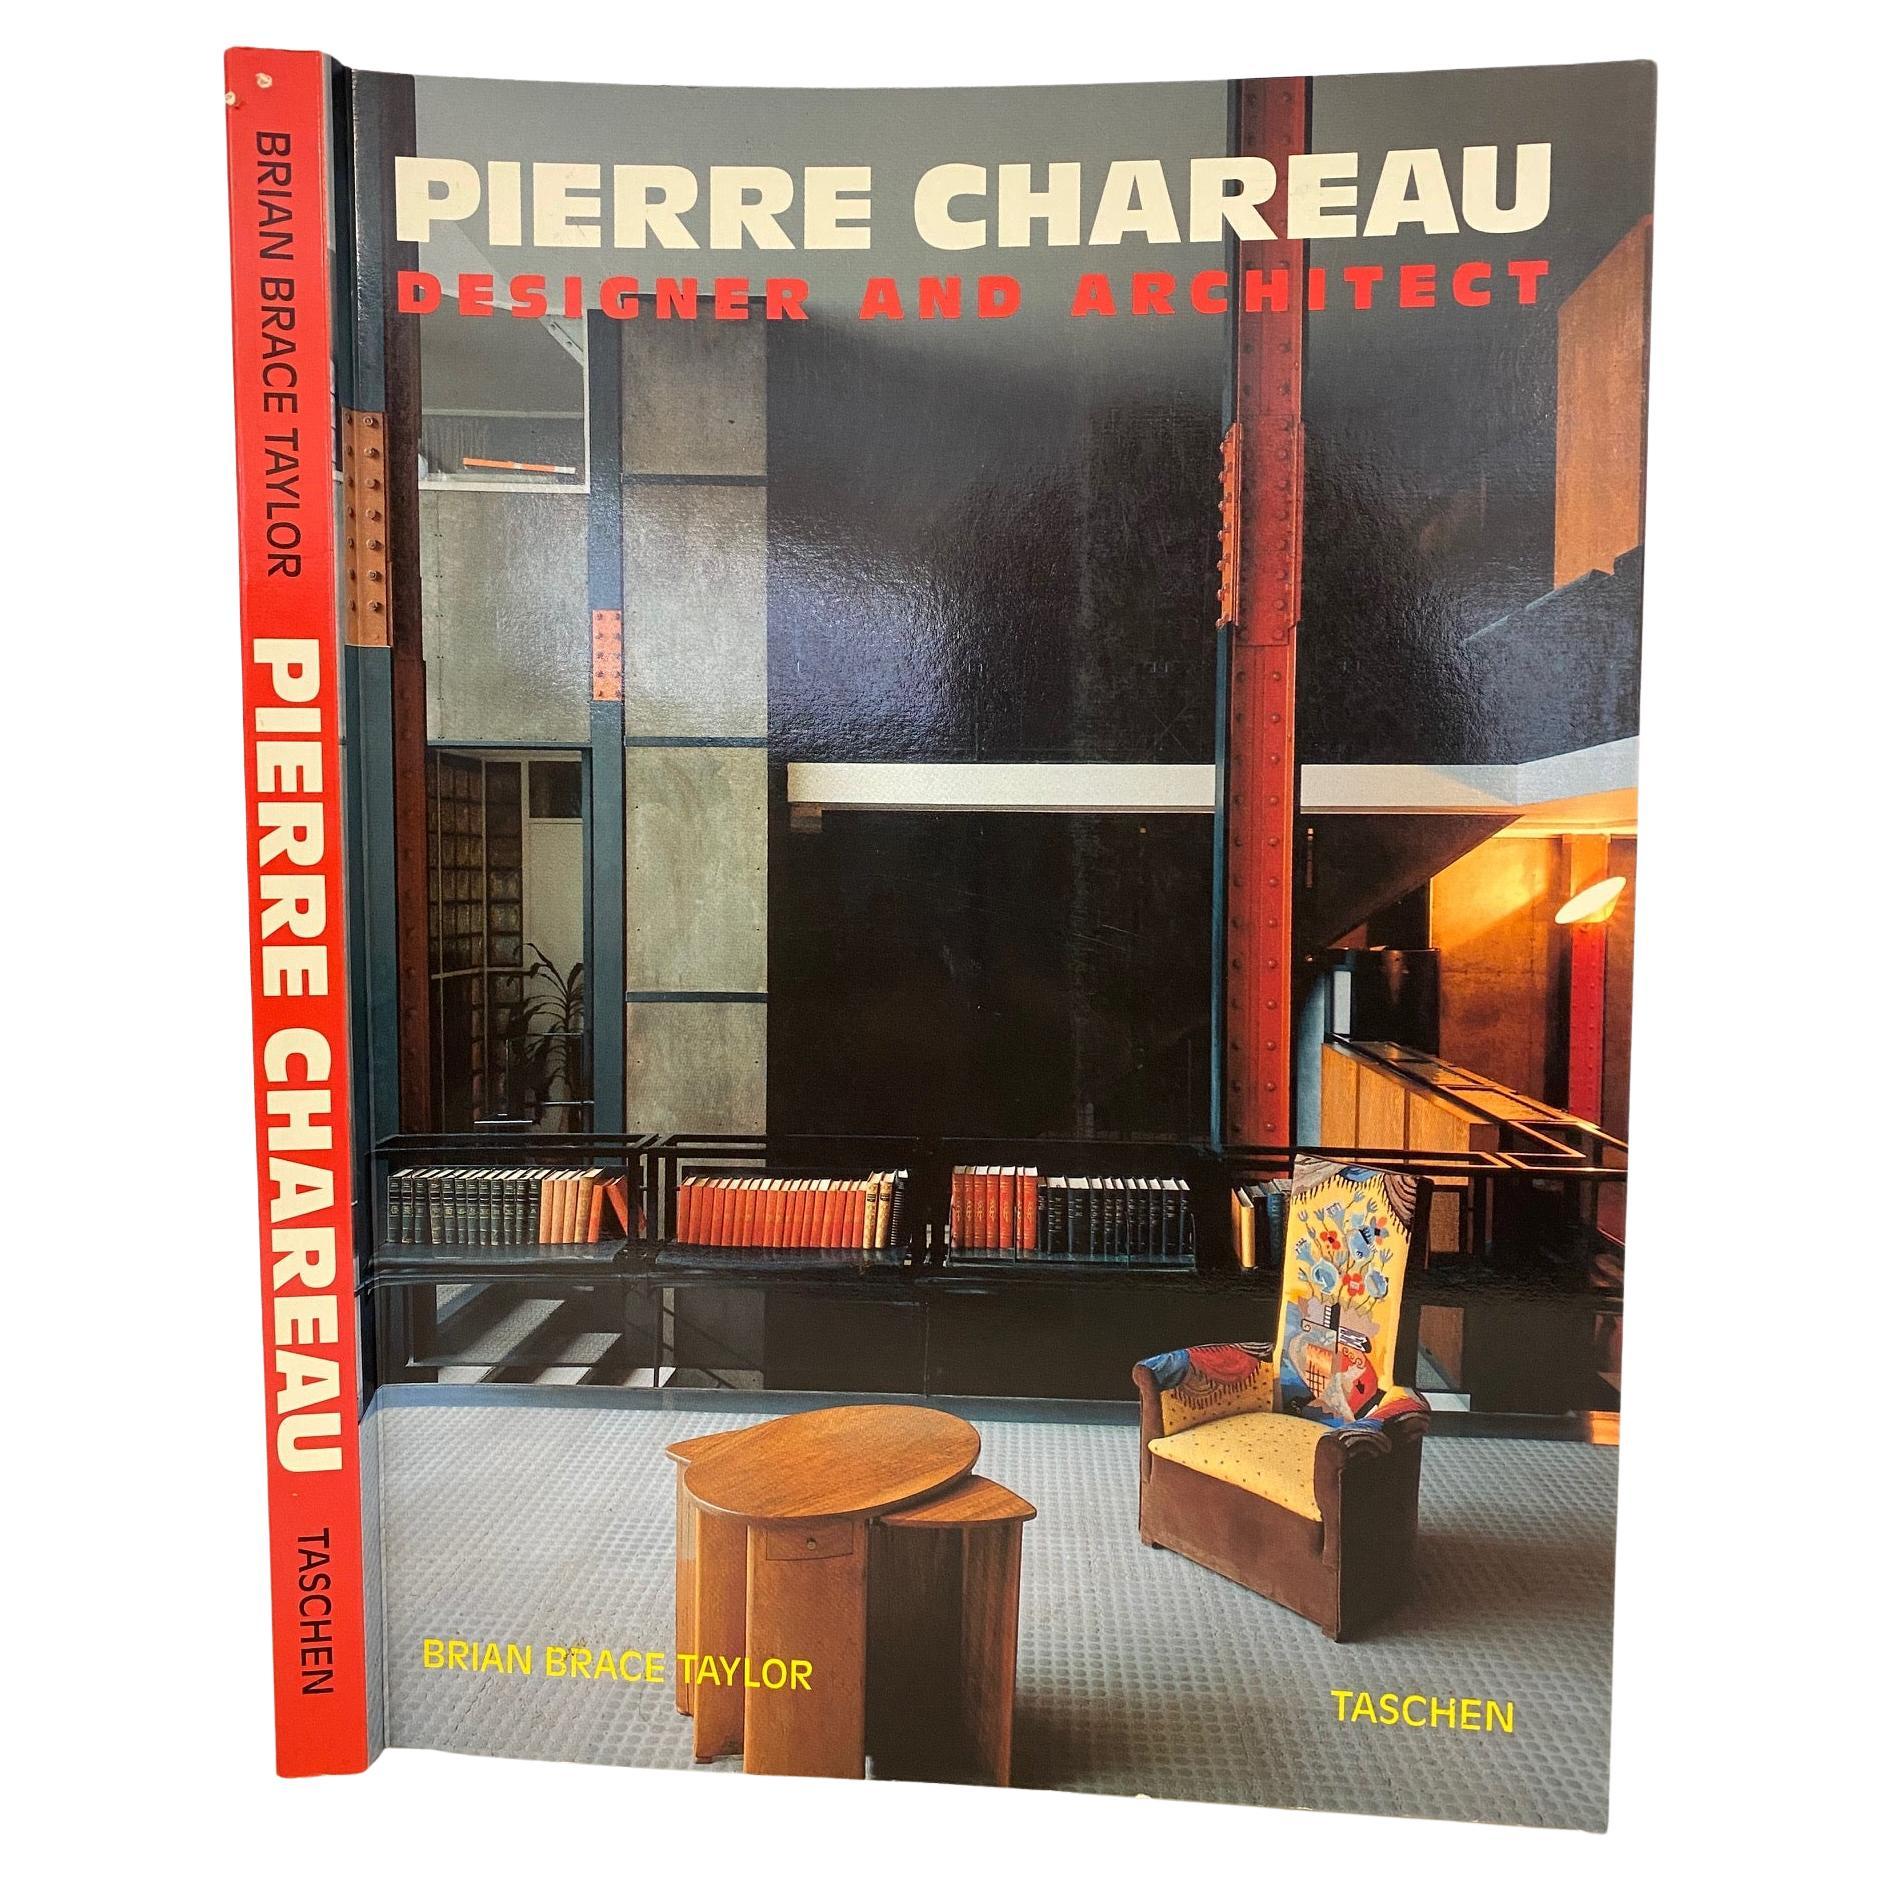 Pierre Chareau, Designer and Architect by Brian Brace Taylor (Book) For Sale